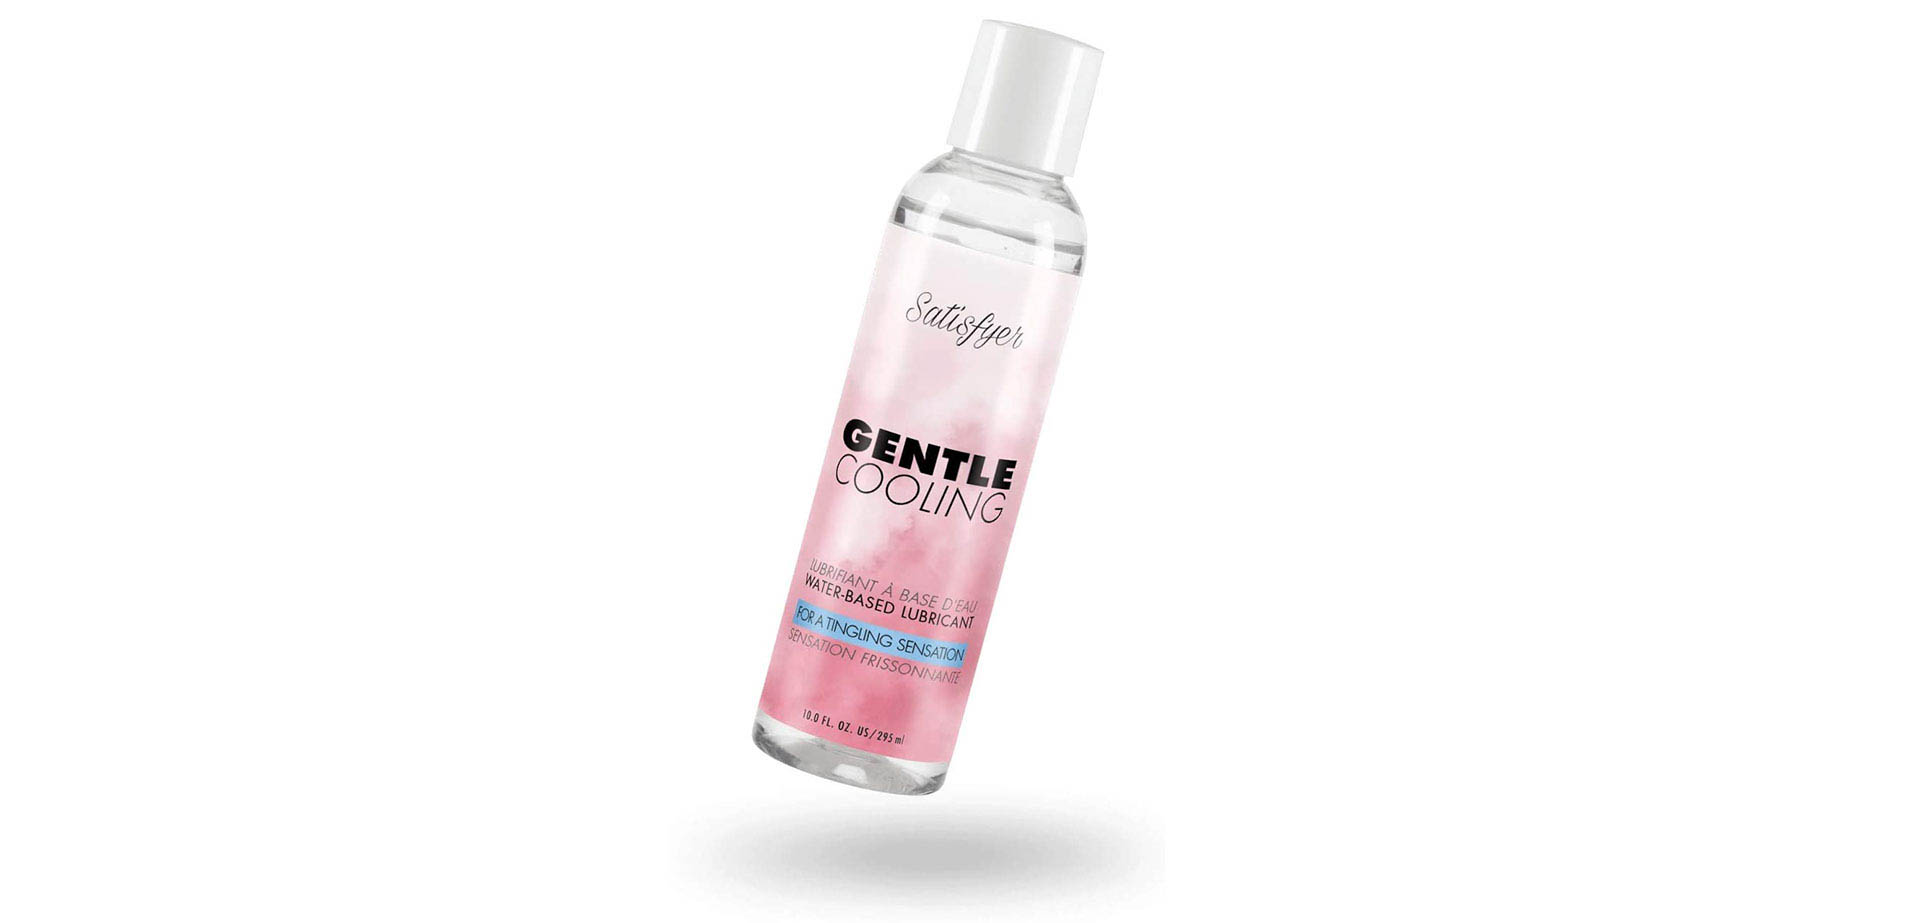 Gentle Cooling Water Based Lubricant.